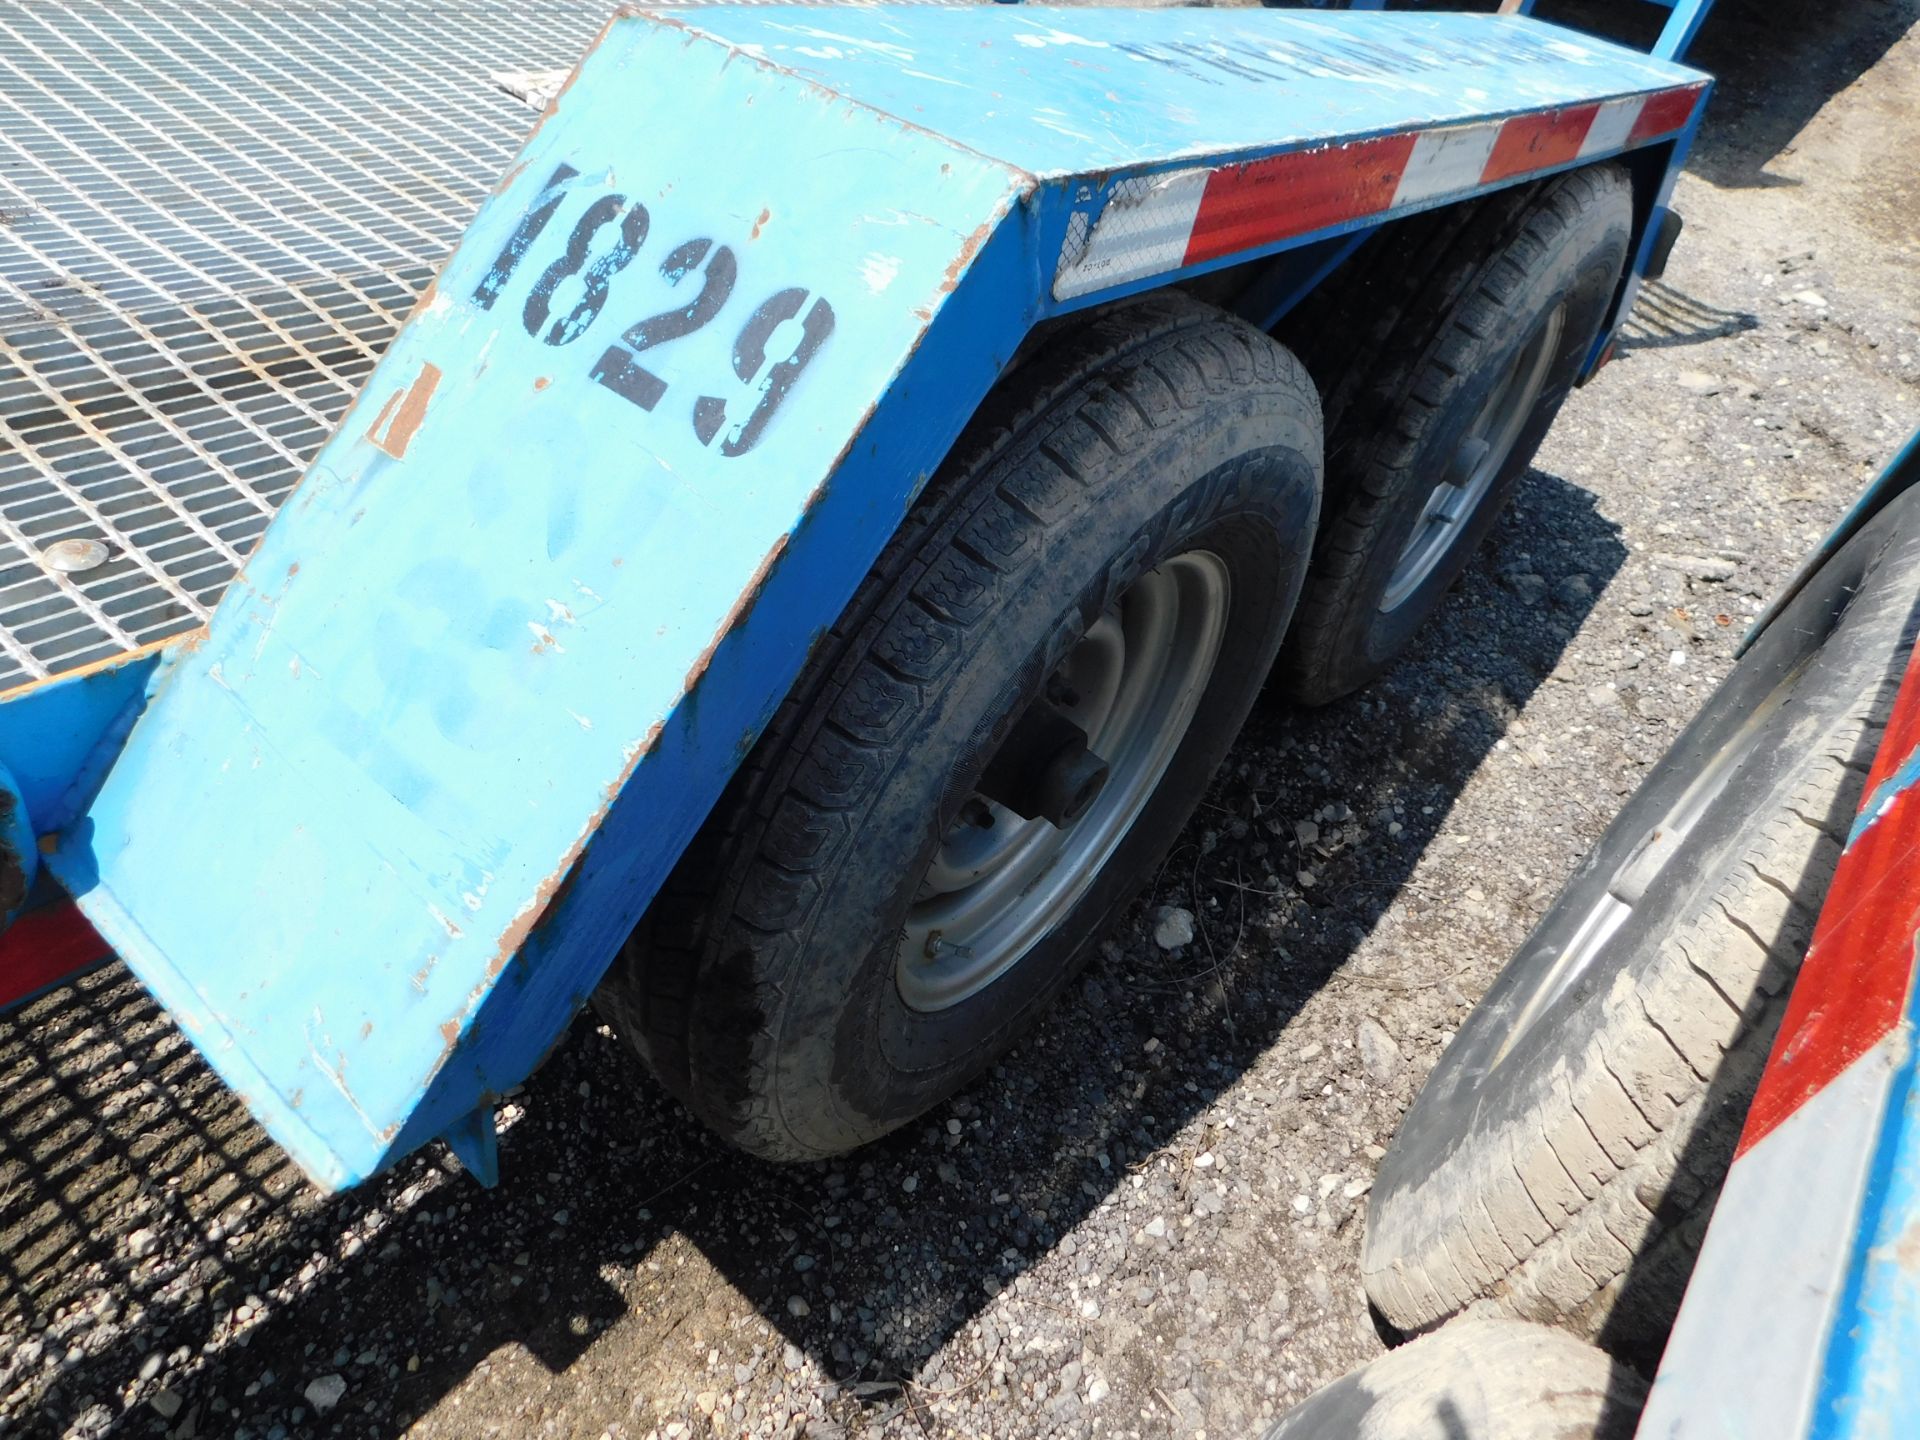 7'W x 15' Long Trailer with Grated Deck, Pintle Hitch, Ramps, Tandem Axle - Image 7 of 9